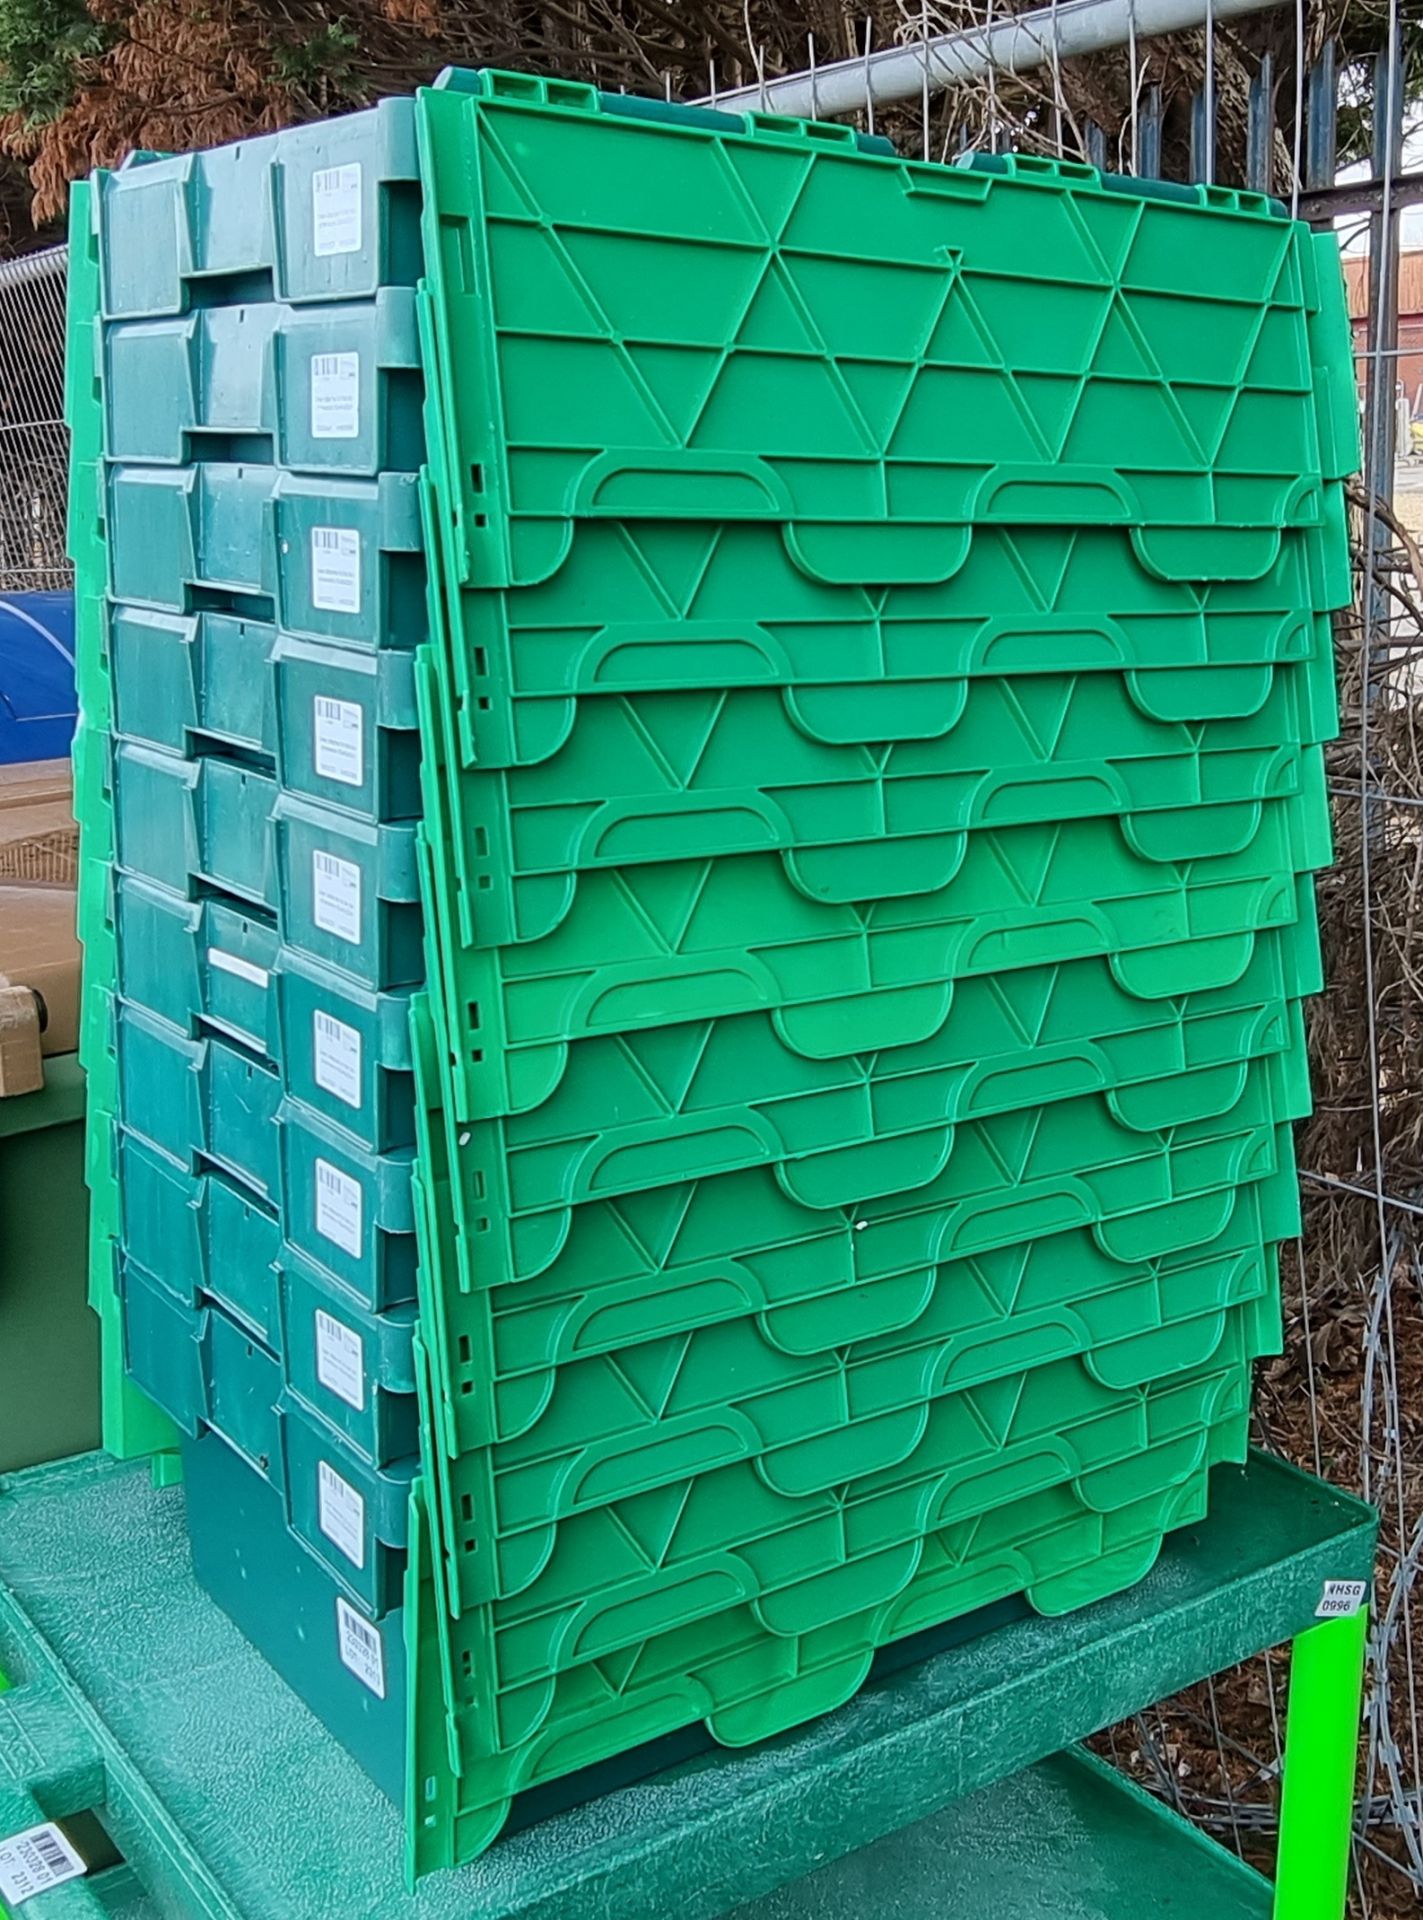 9x Green attached lid tote boxes - dimensions: 60 x 40 x 25cm - Image 2 of 3